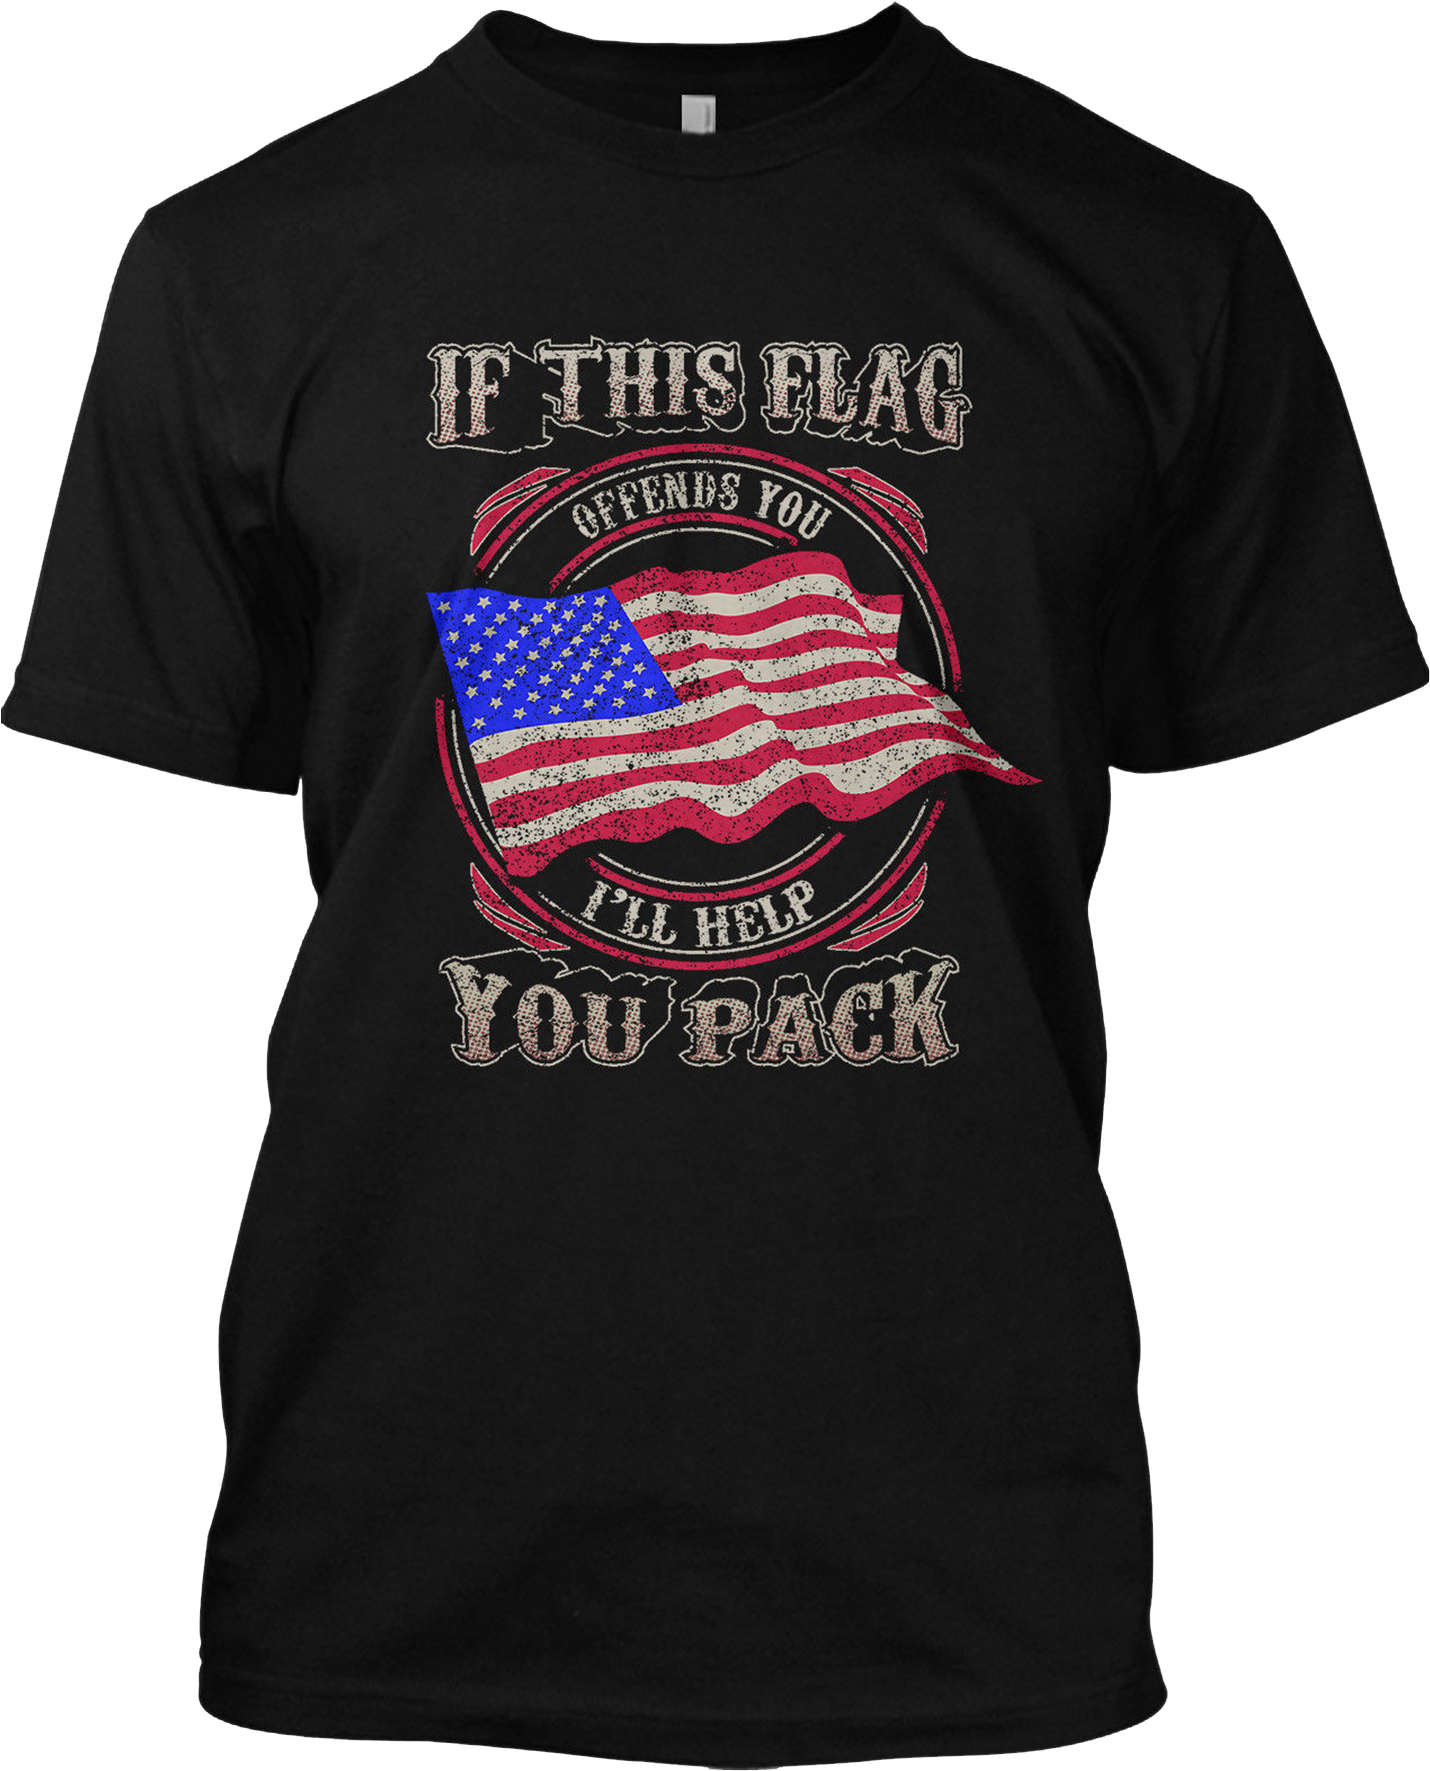 If This Flag Offends You I'll Help You Pack Political USA Deport T Shirt Tee